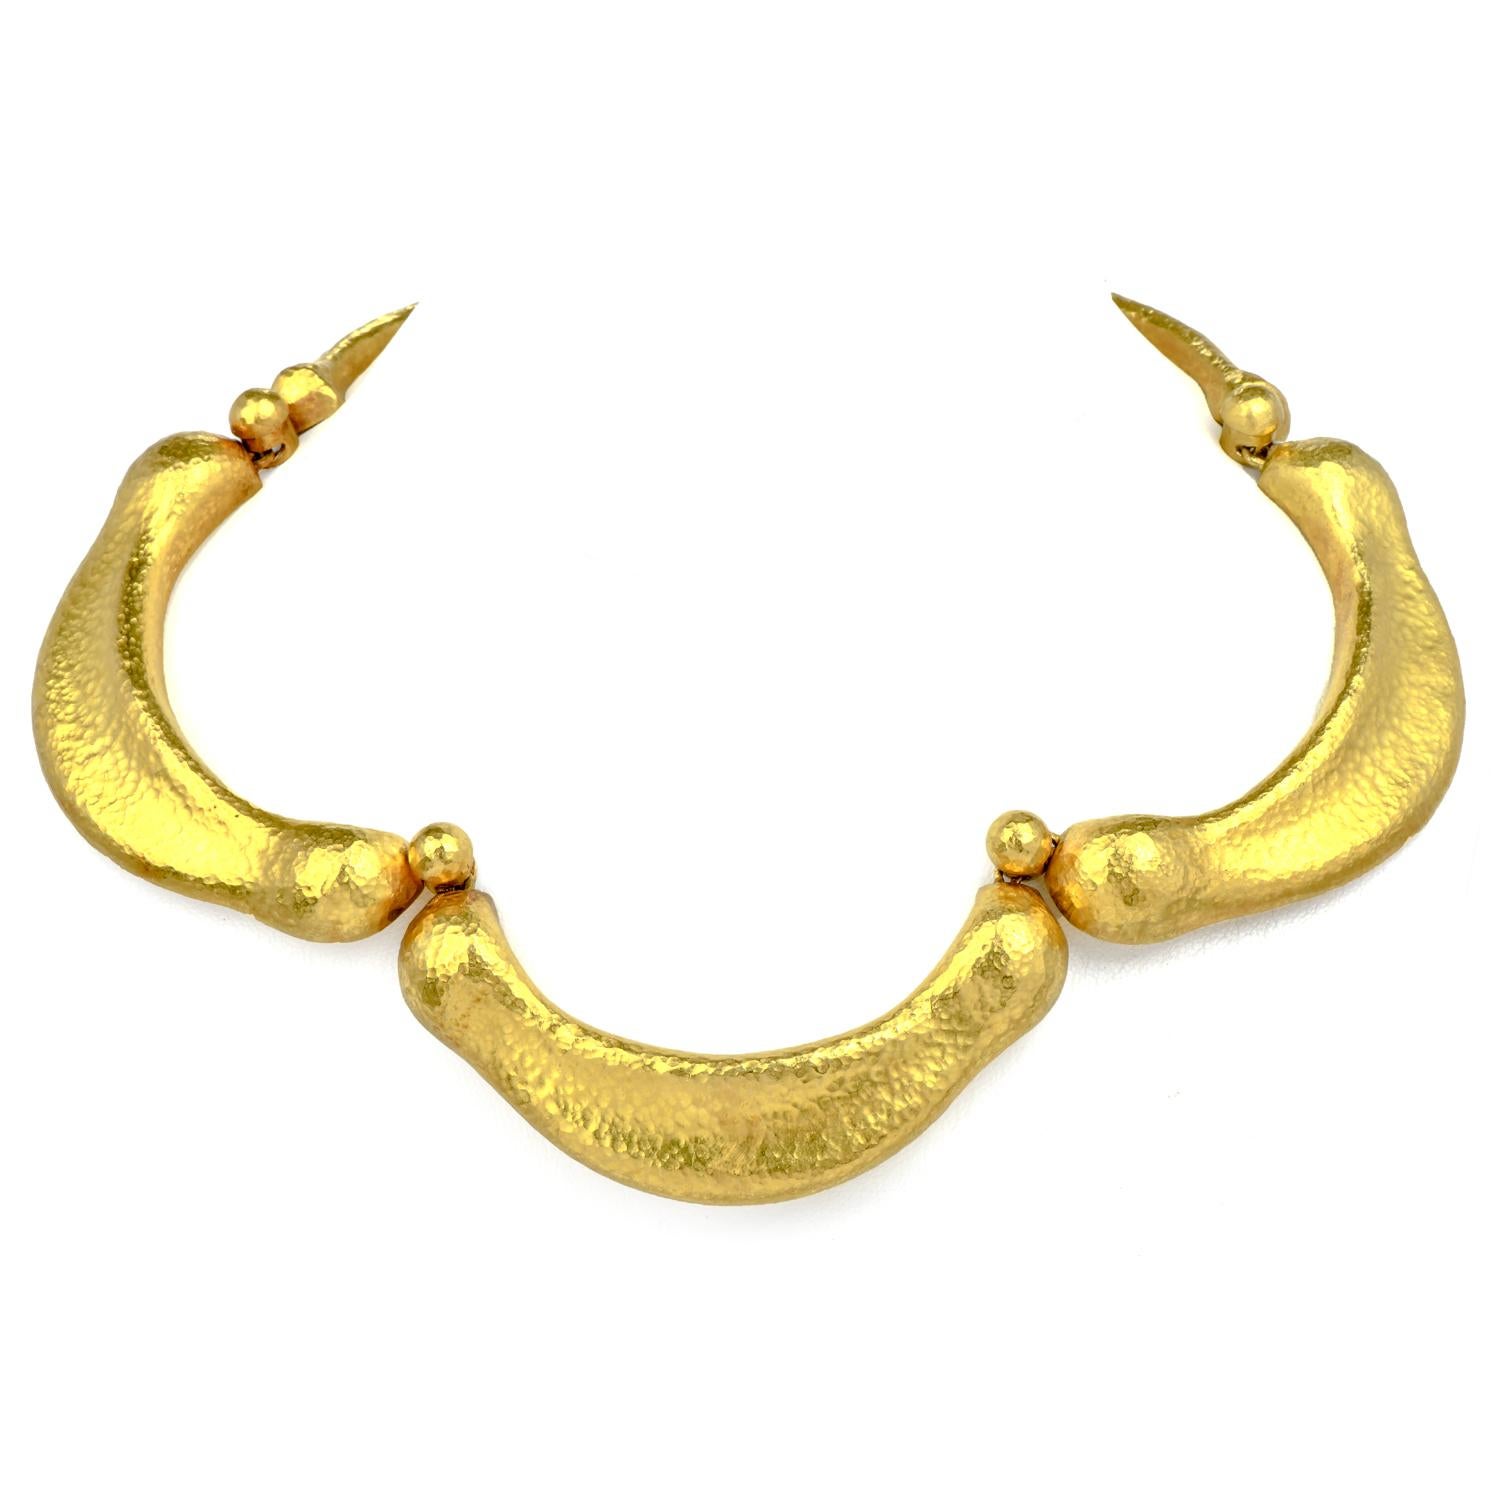 Stunning vintage Lalaounis Greek 22K Gold collar necklace 

Was crafted in 22K yellow gold. Featuring a textured style with three large links.

The necklace weighs 132.8 grams and measures 17 inches in inner circumference.

Ilias Lalaounis spent his